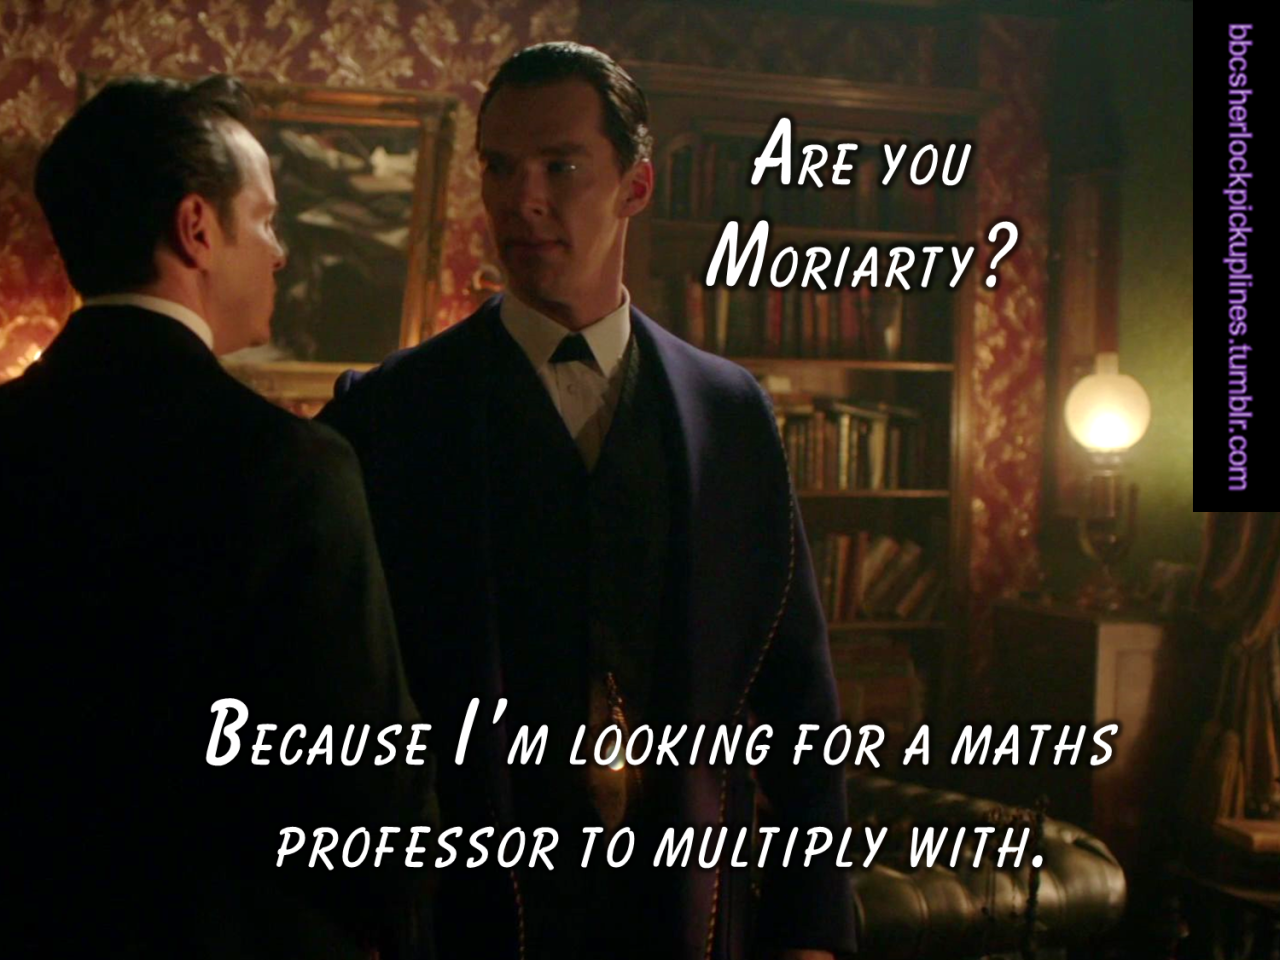 â€œAre you Moriarty? Because Iâ€™m looking for a maths professor to multiply